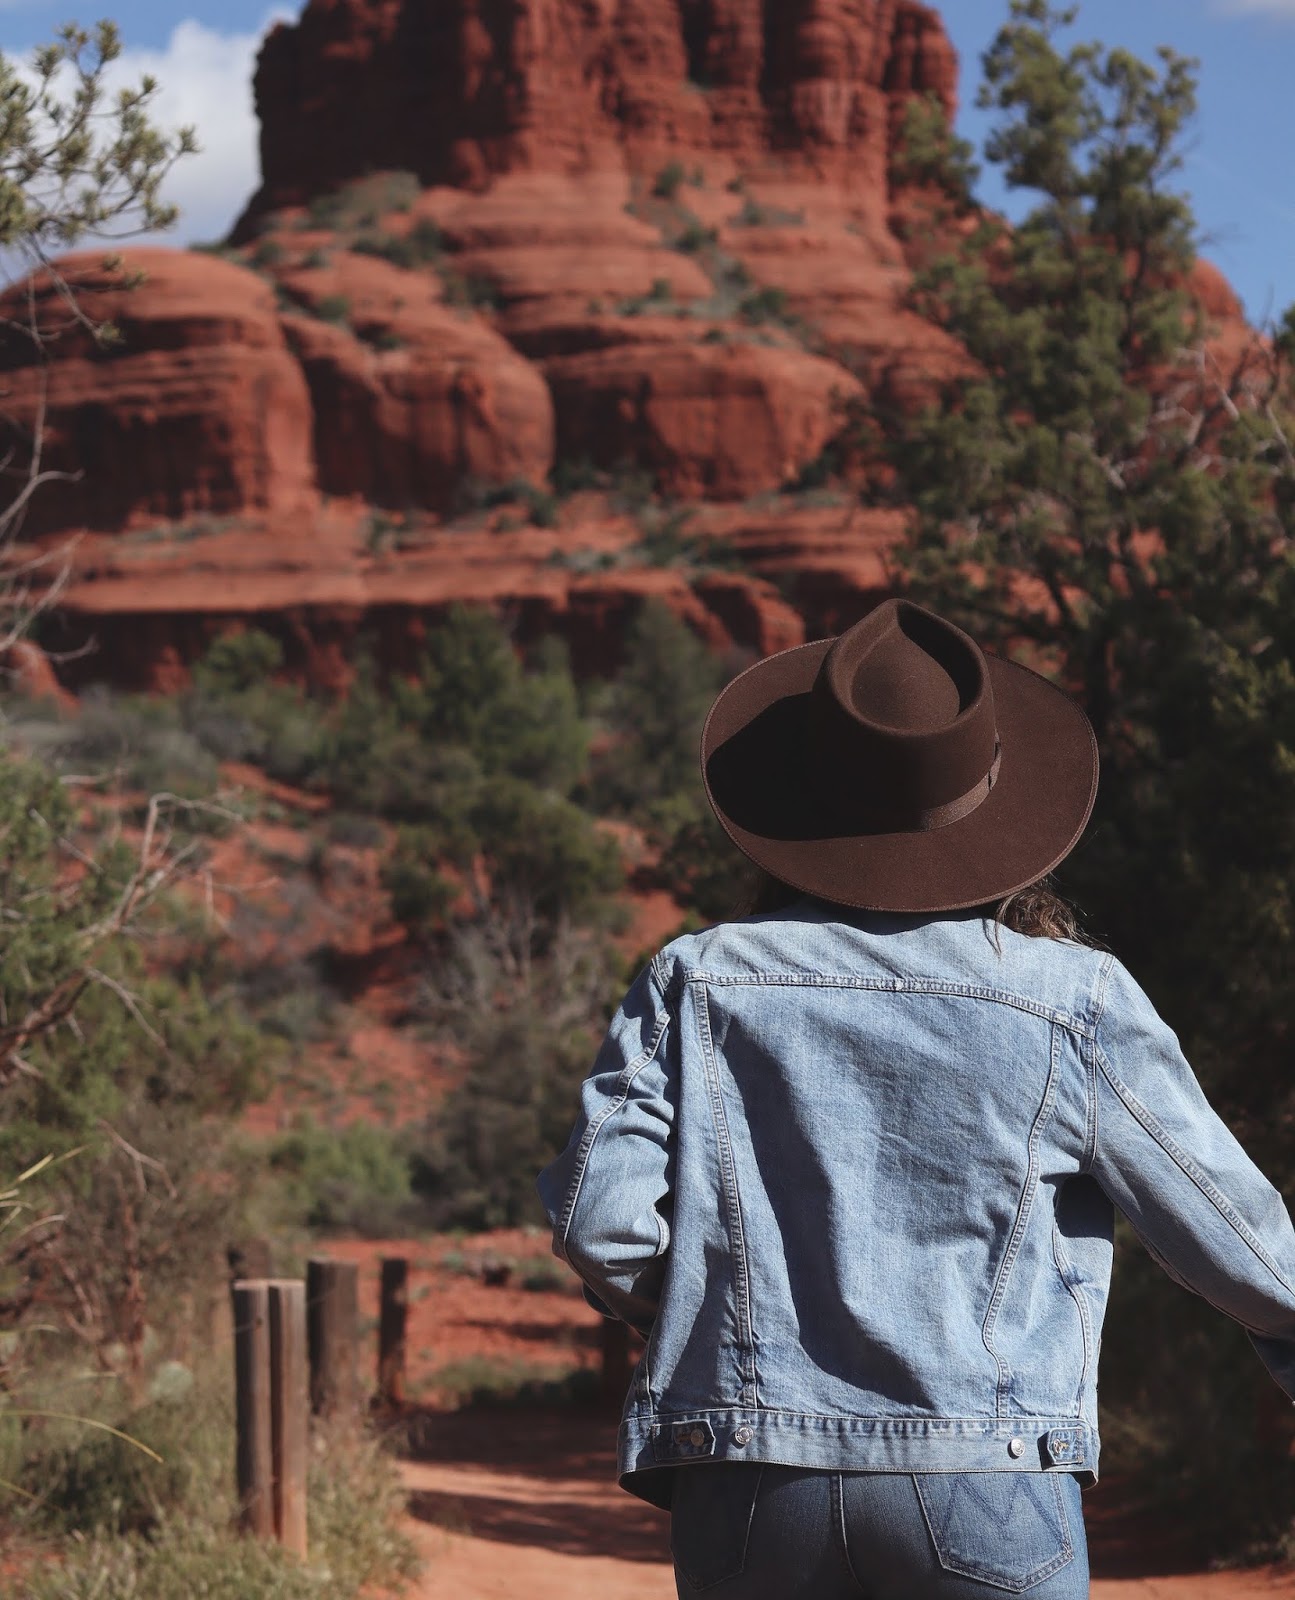 denim on denim outfit brunette the label jacket lack of color rancher hat mother jeans Sedona Arizona travel diary bell rock